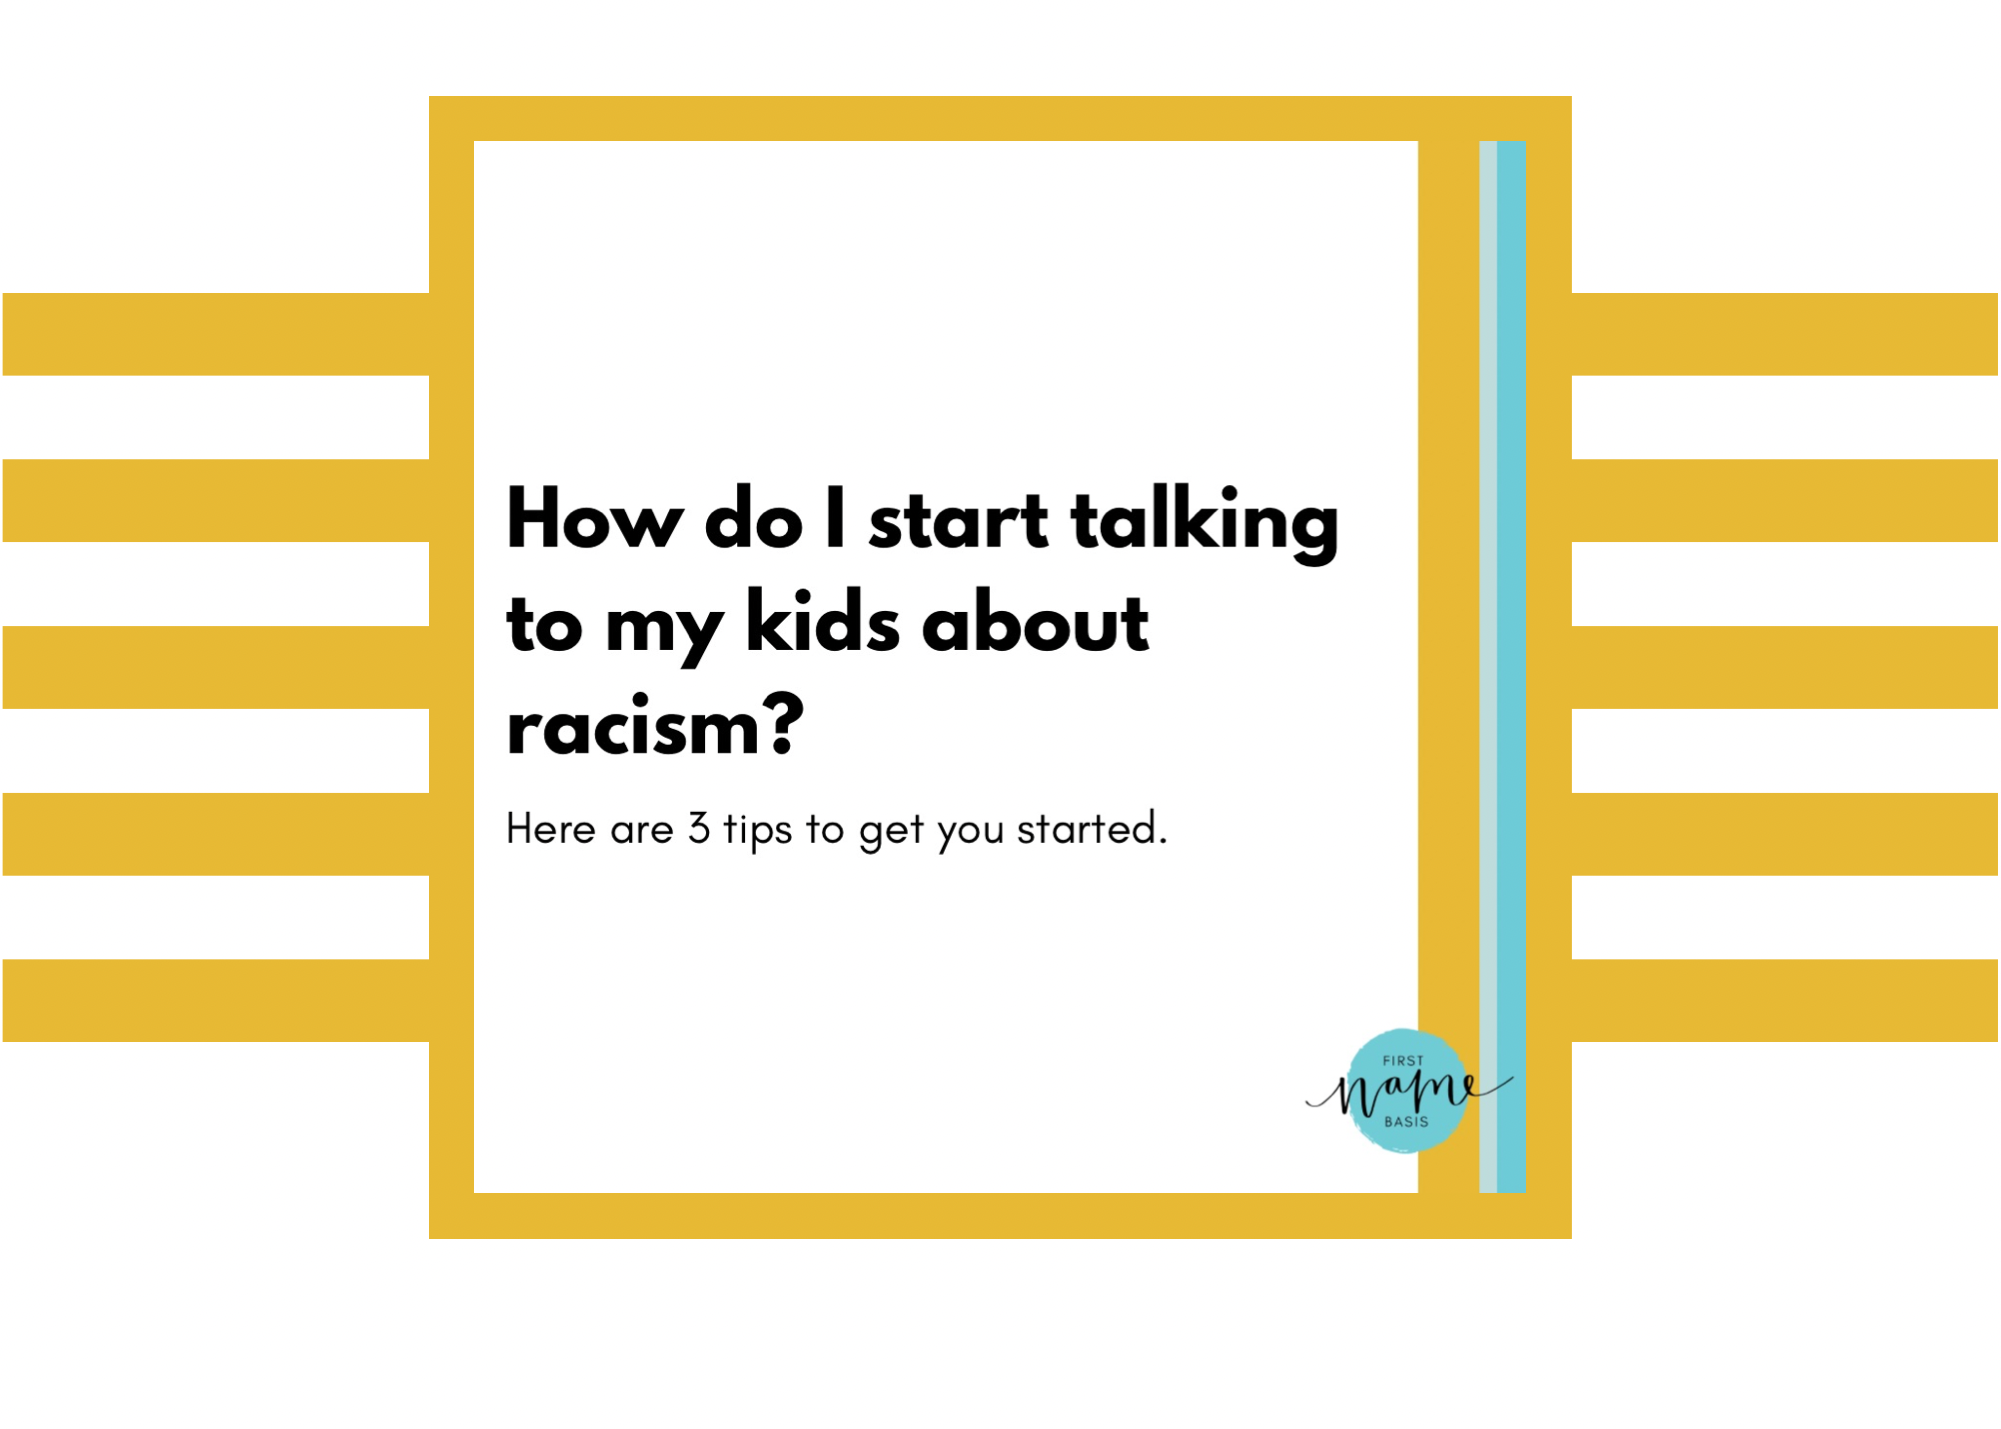 How Do I Start Talking to My Kids About Racism?